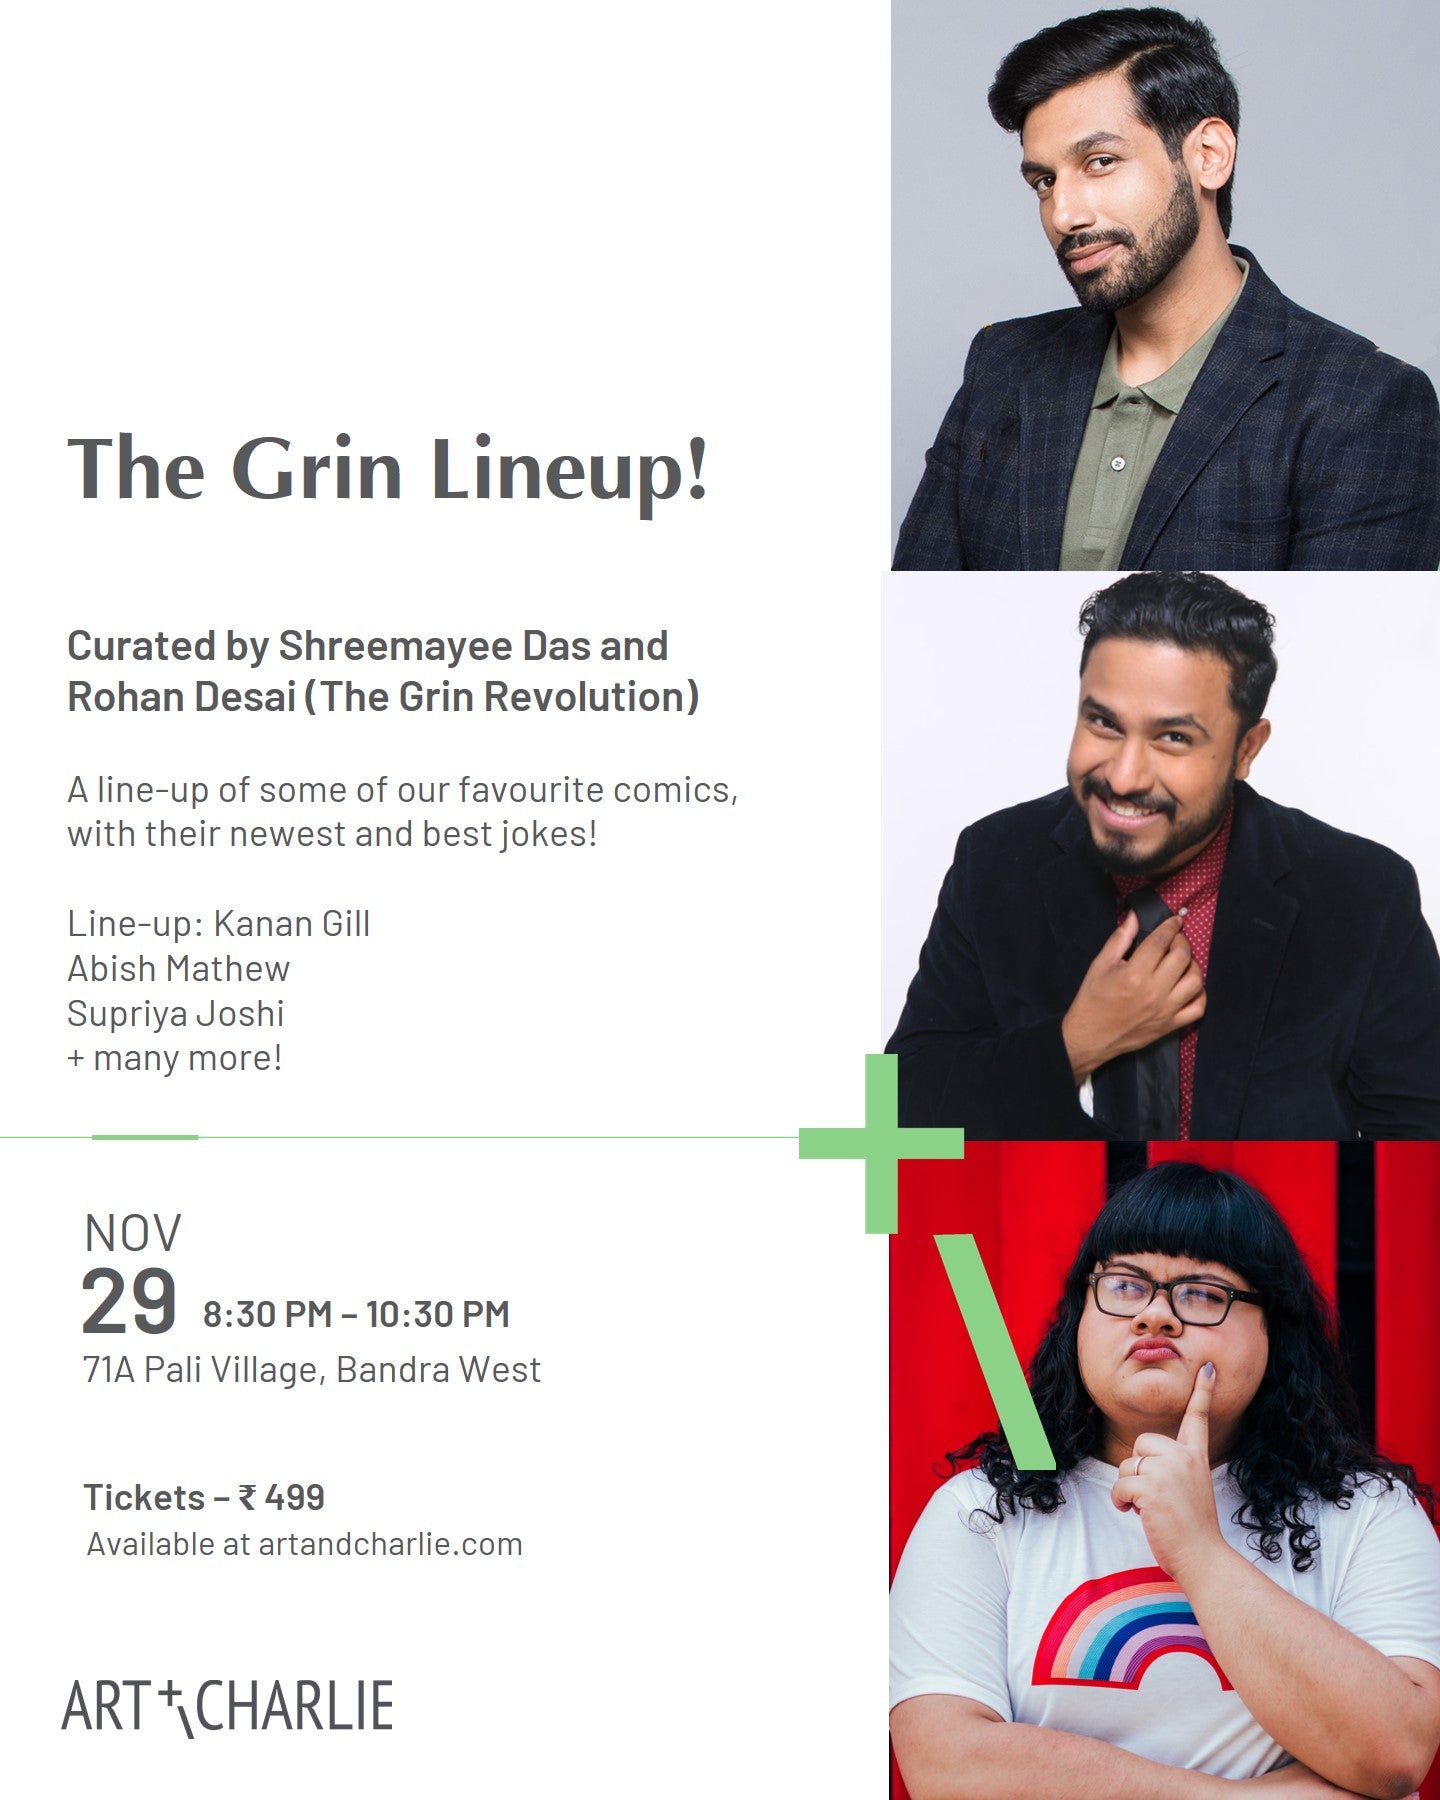 Ticket - Comedy - The Grin Lineup! - Nov 29 - 8:30 PM to 10:30 PM